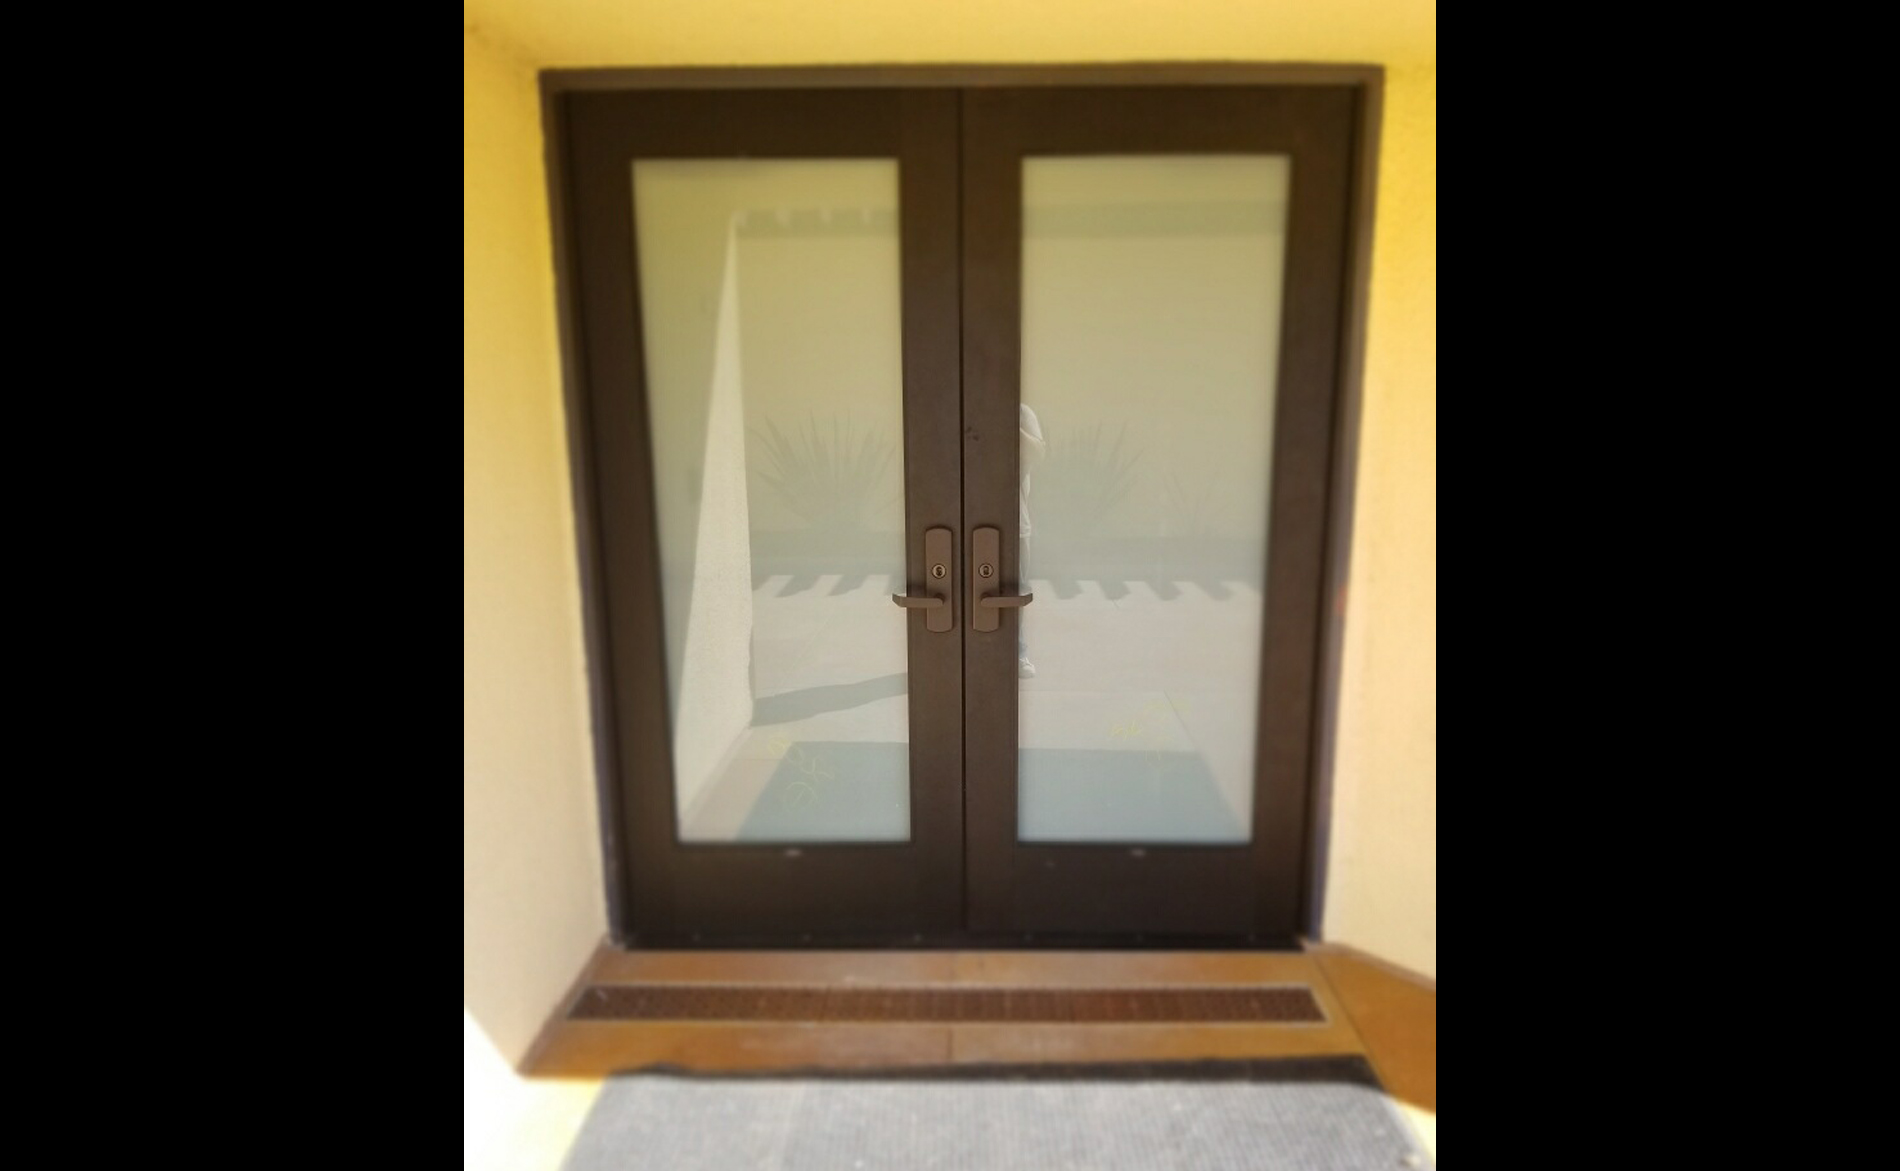 Manual Pair Of Storefront Doors With Frosted Glass